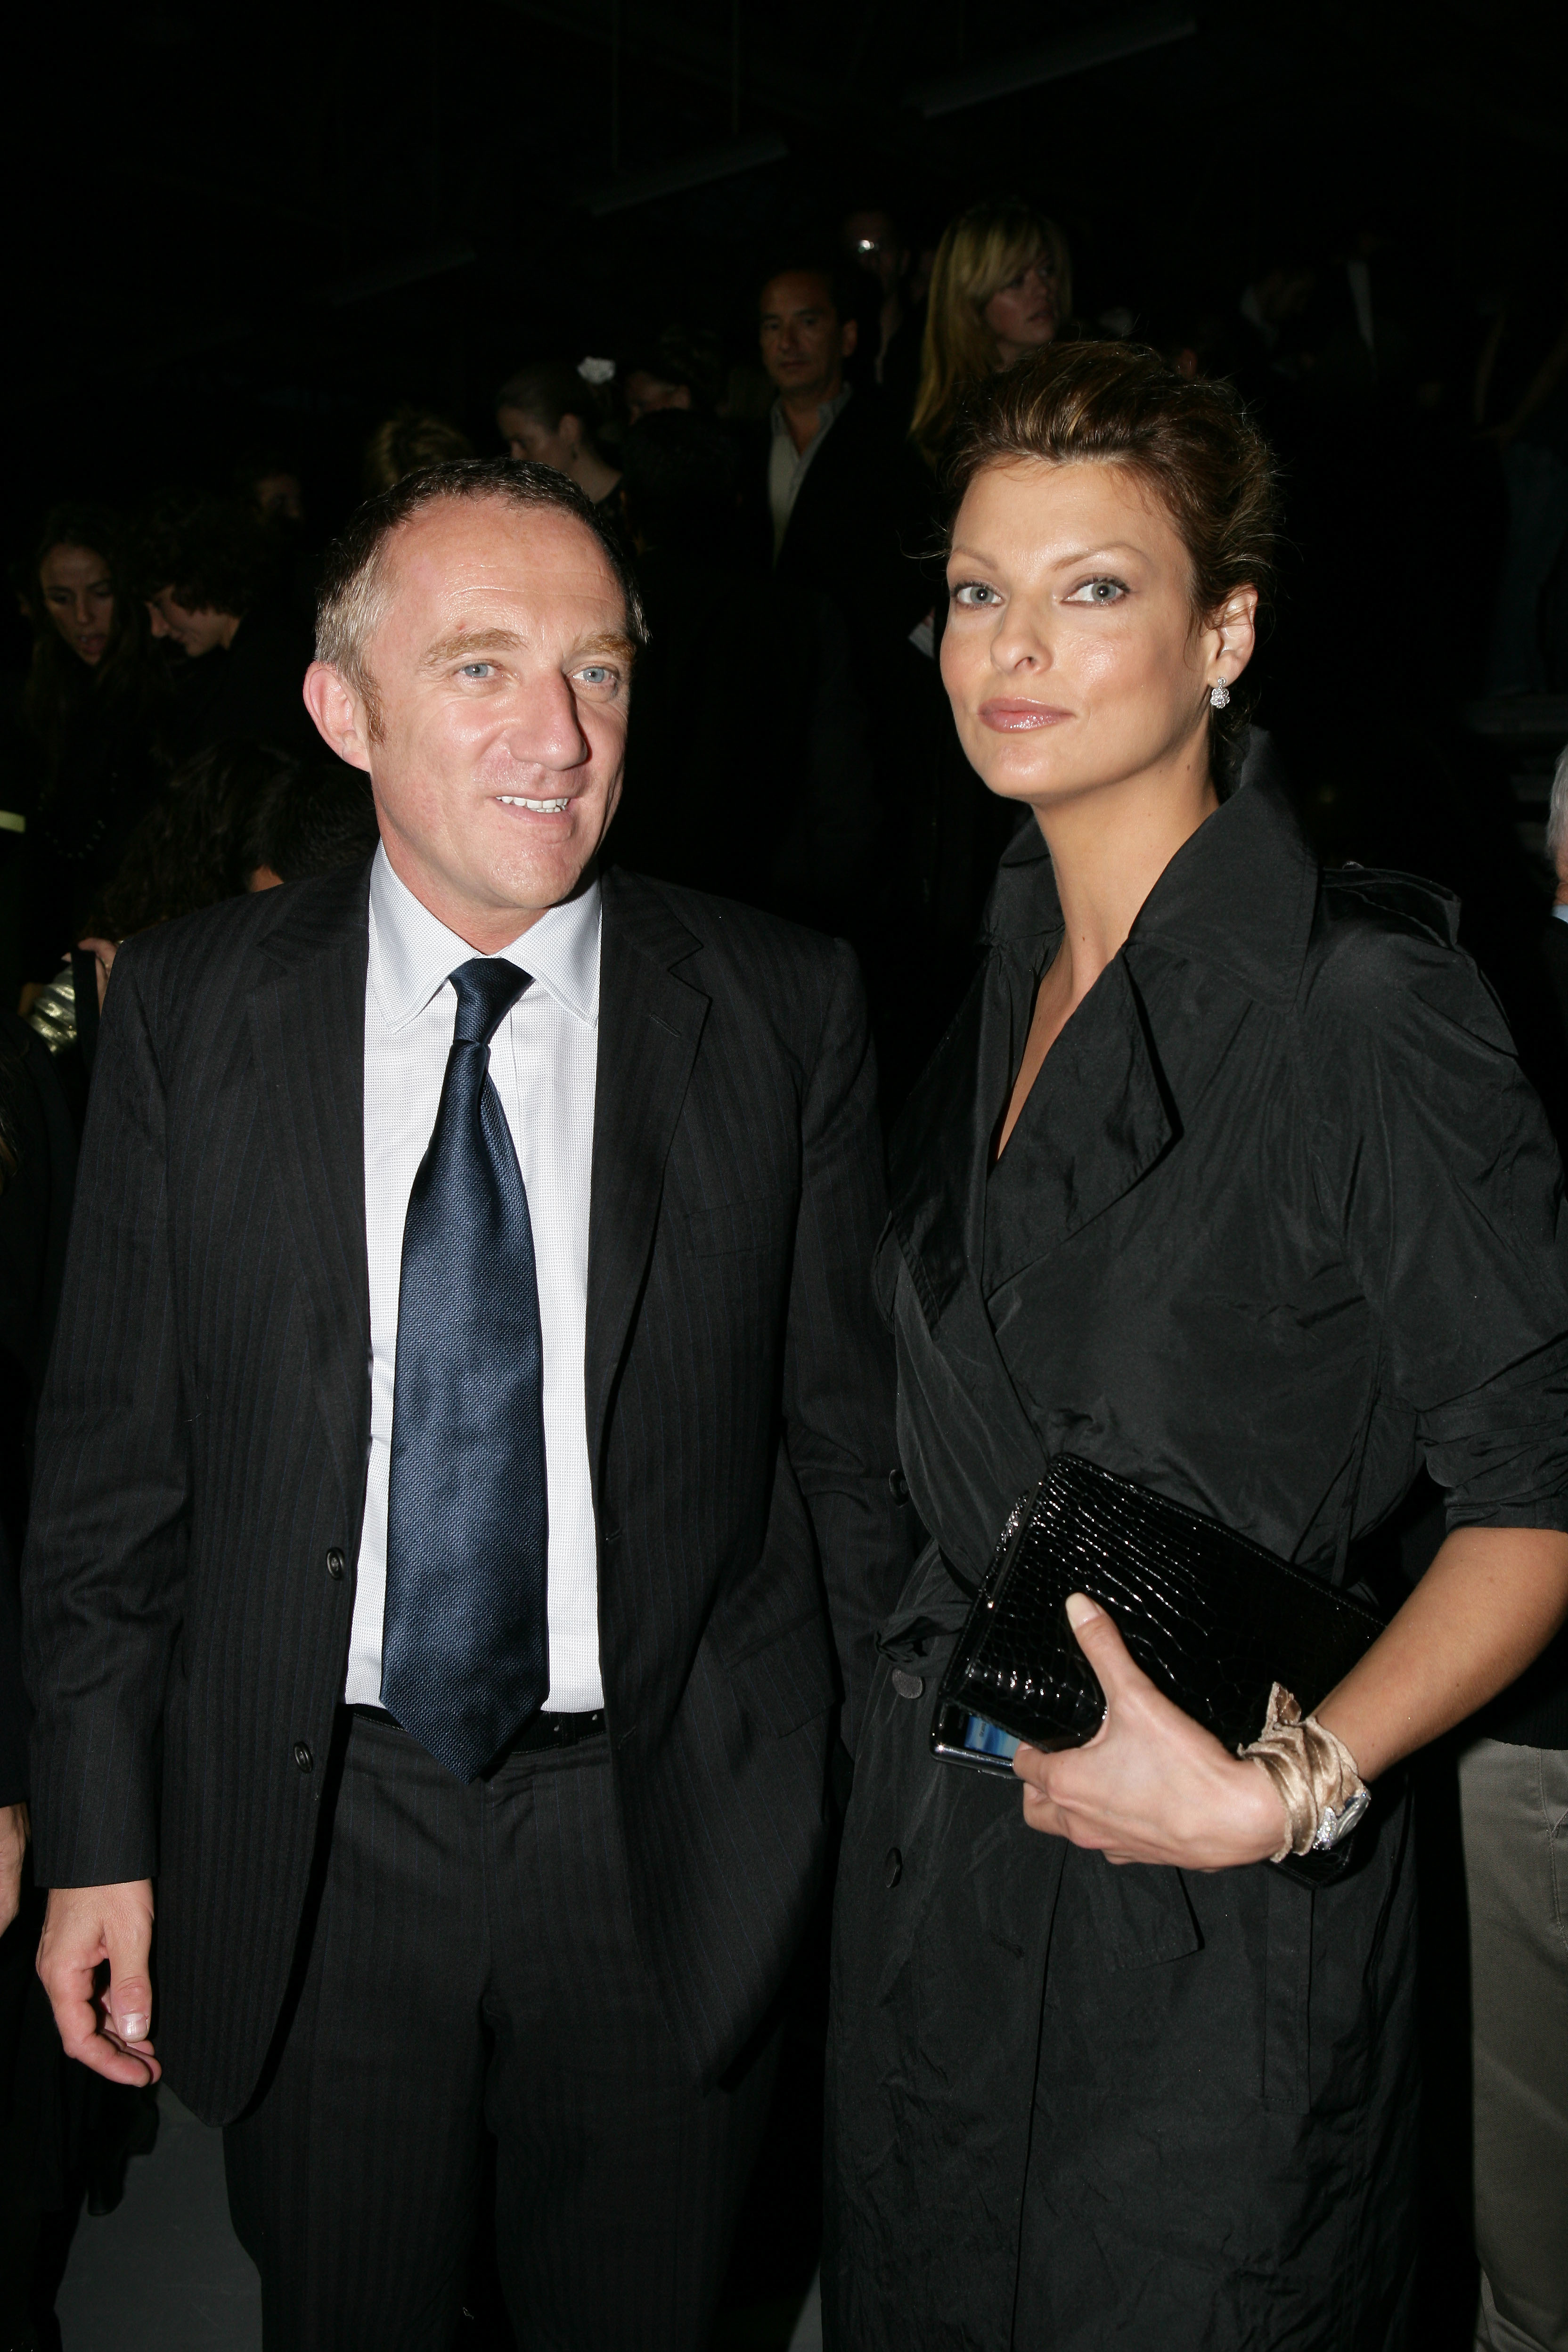 Francois-Henri Pinault and Linda Evangelista at the Alexander McQueen ready-to-wear spring-summer 2006 collection fashion show on October 8, 2005 | Source: Getty Images